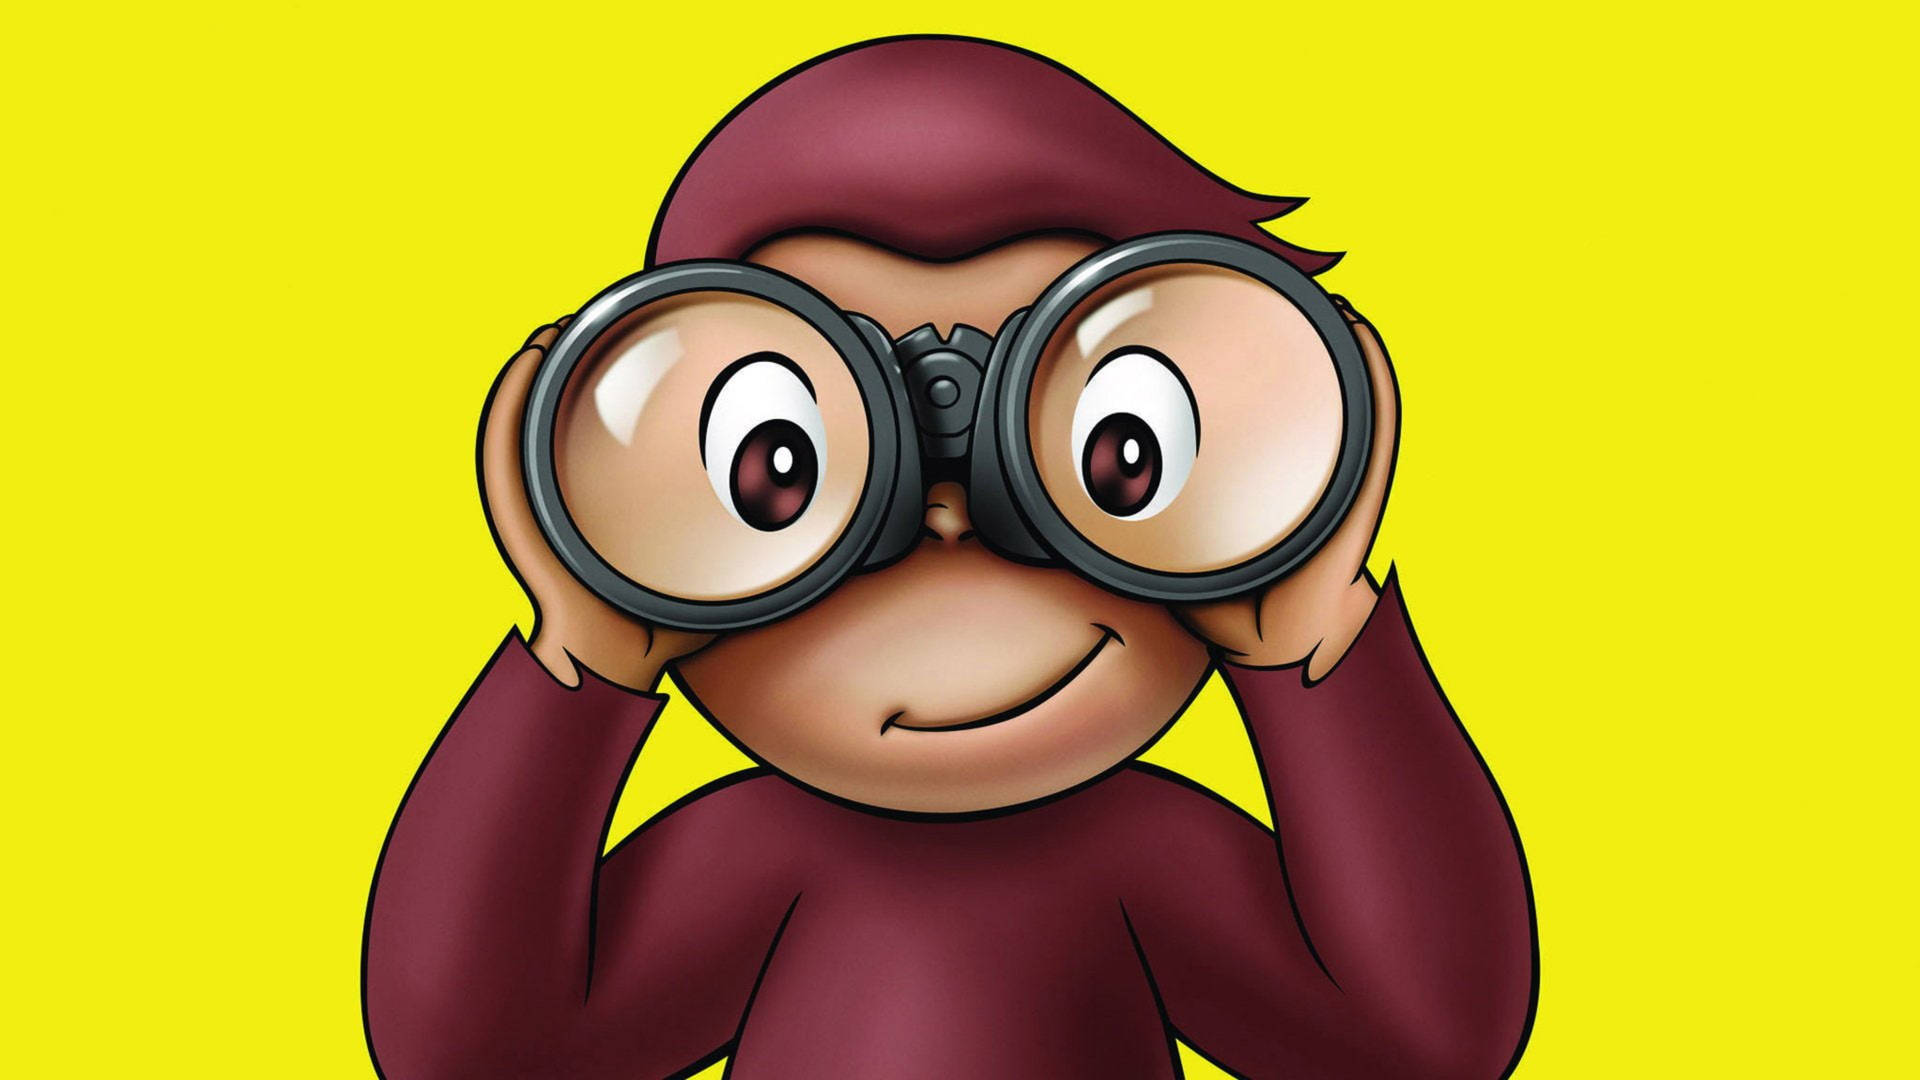 Curious Monkey George Background